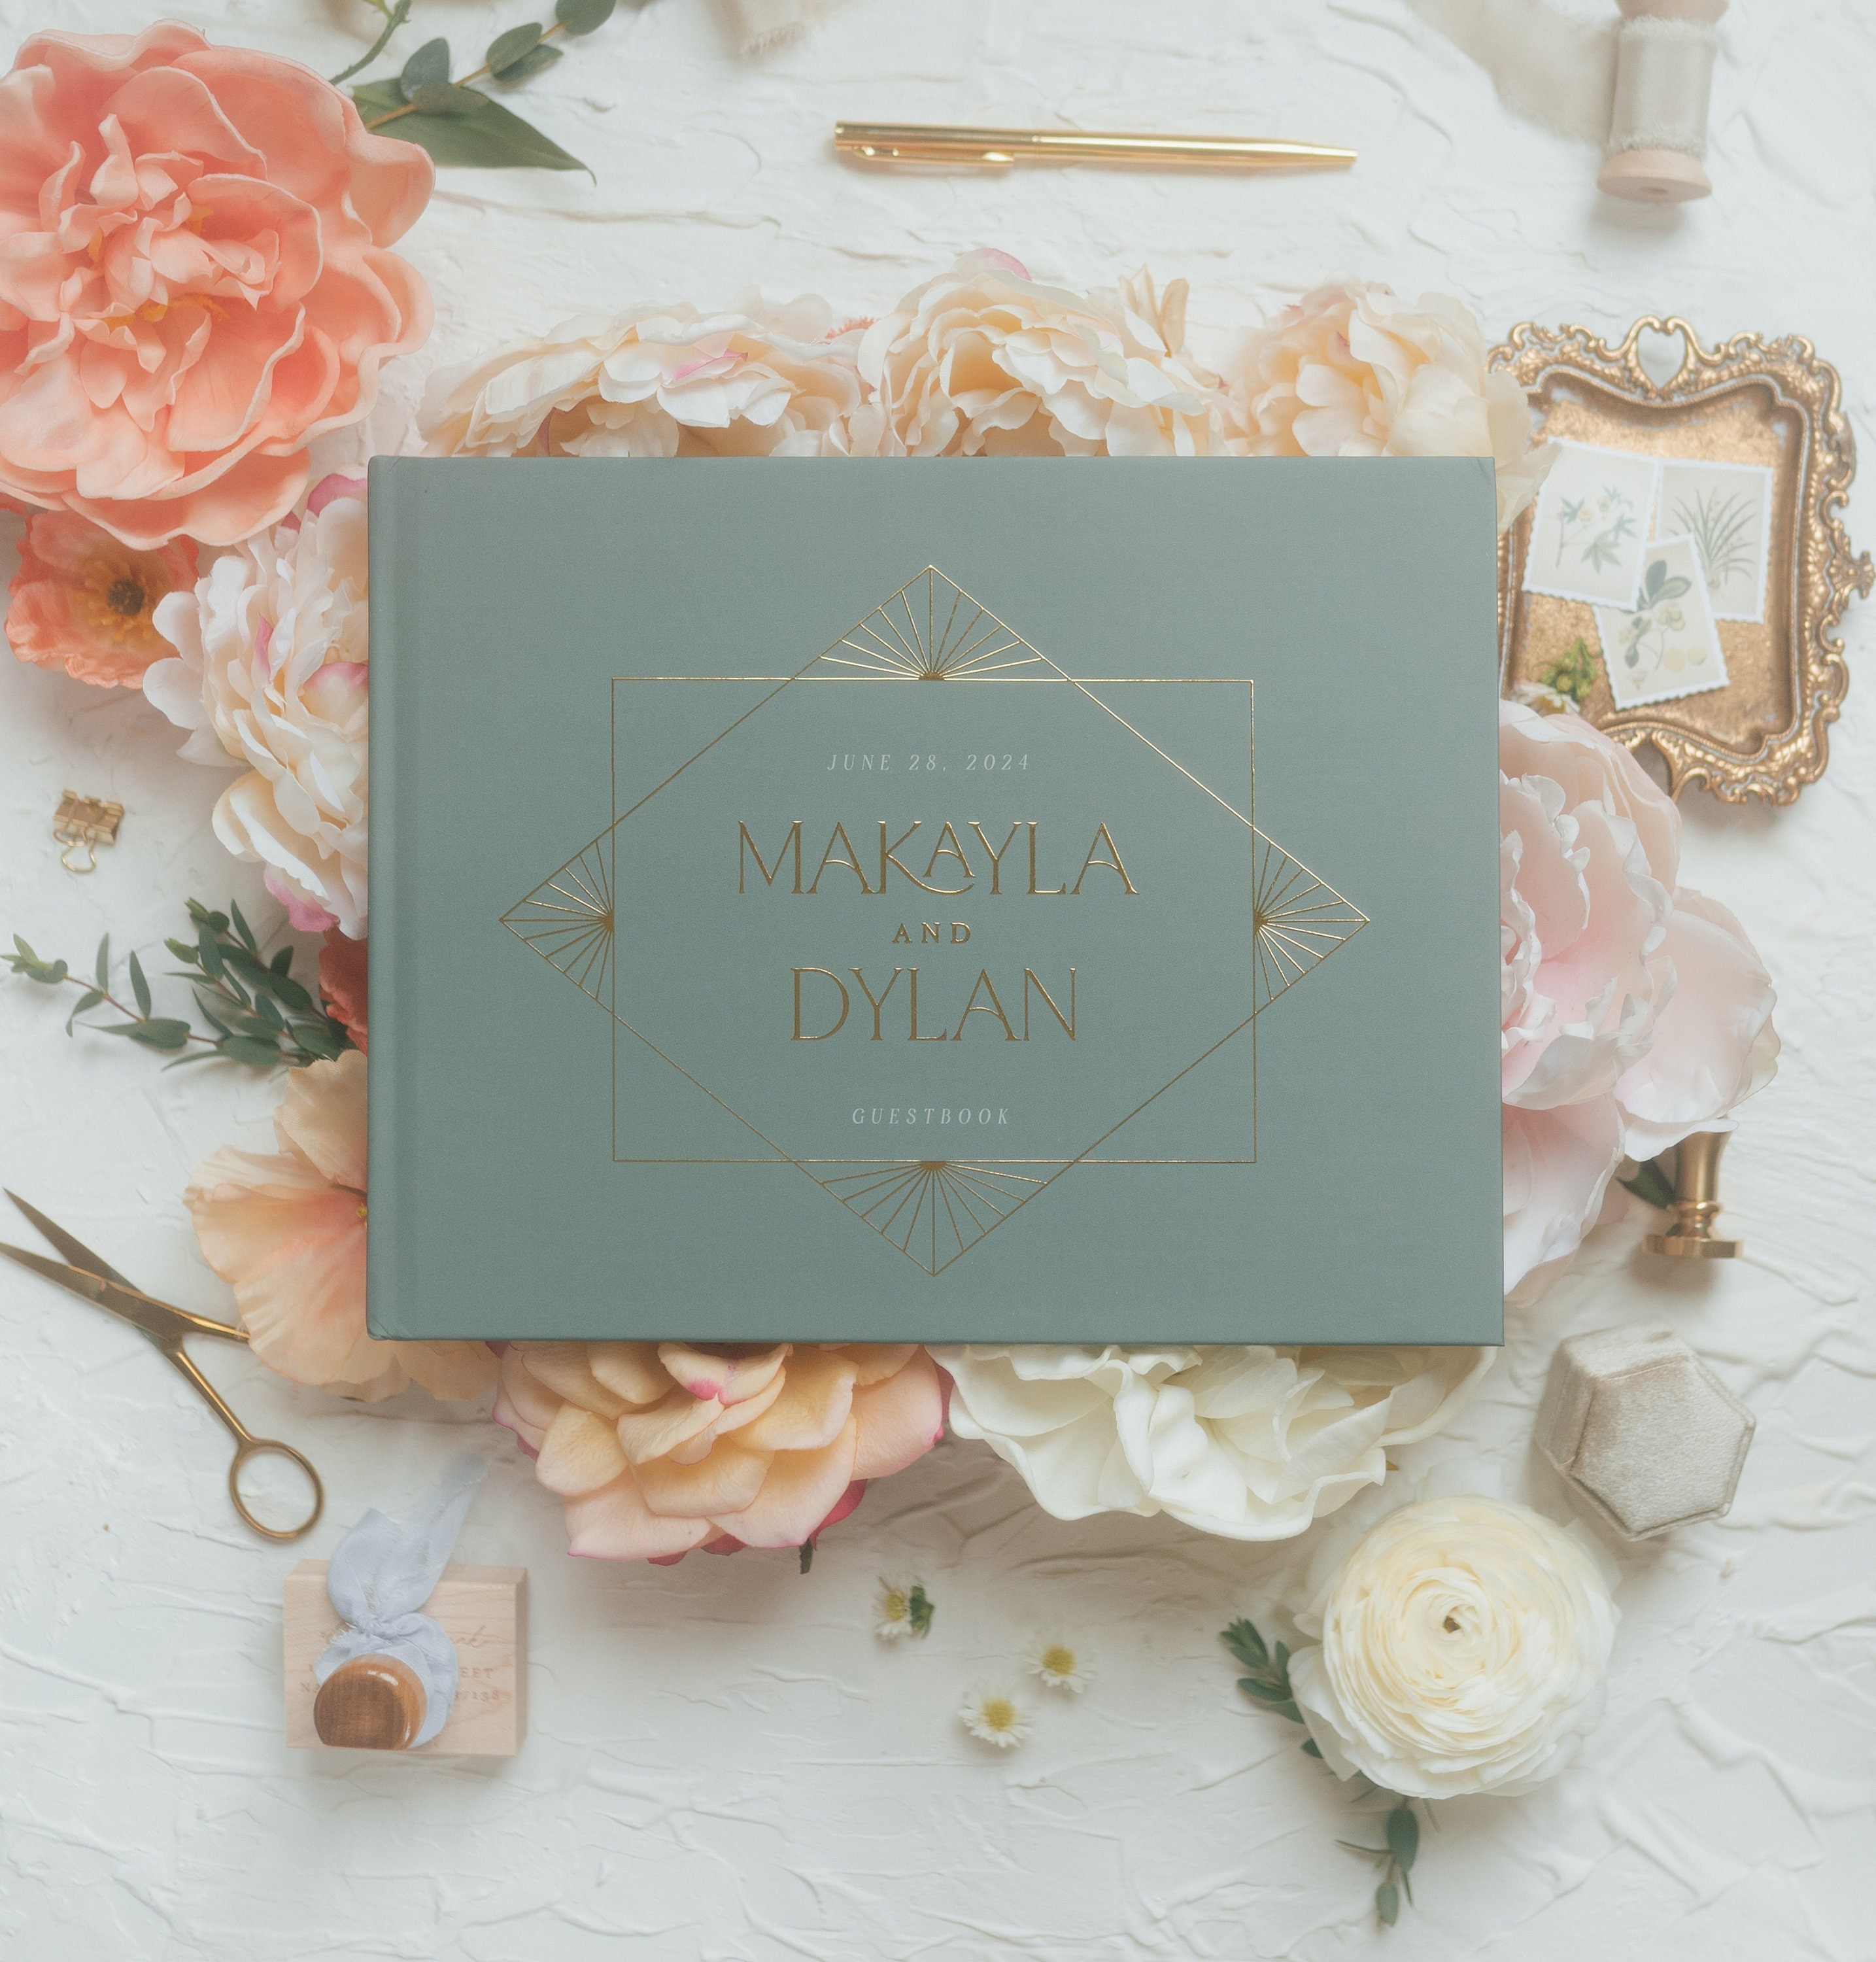 The 23 Best Wedding Guest Books of 2024